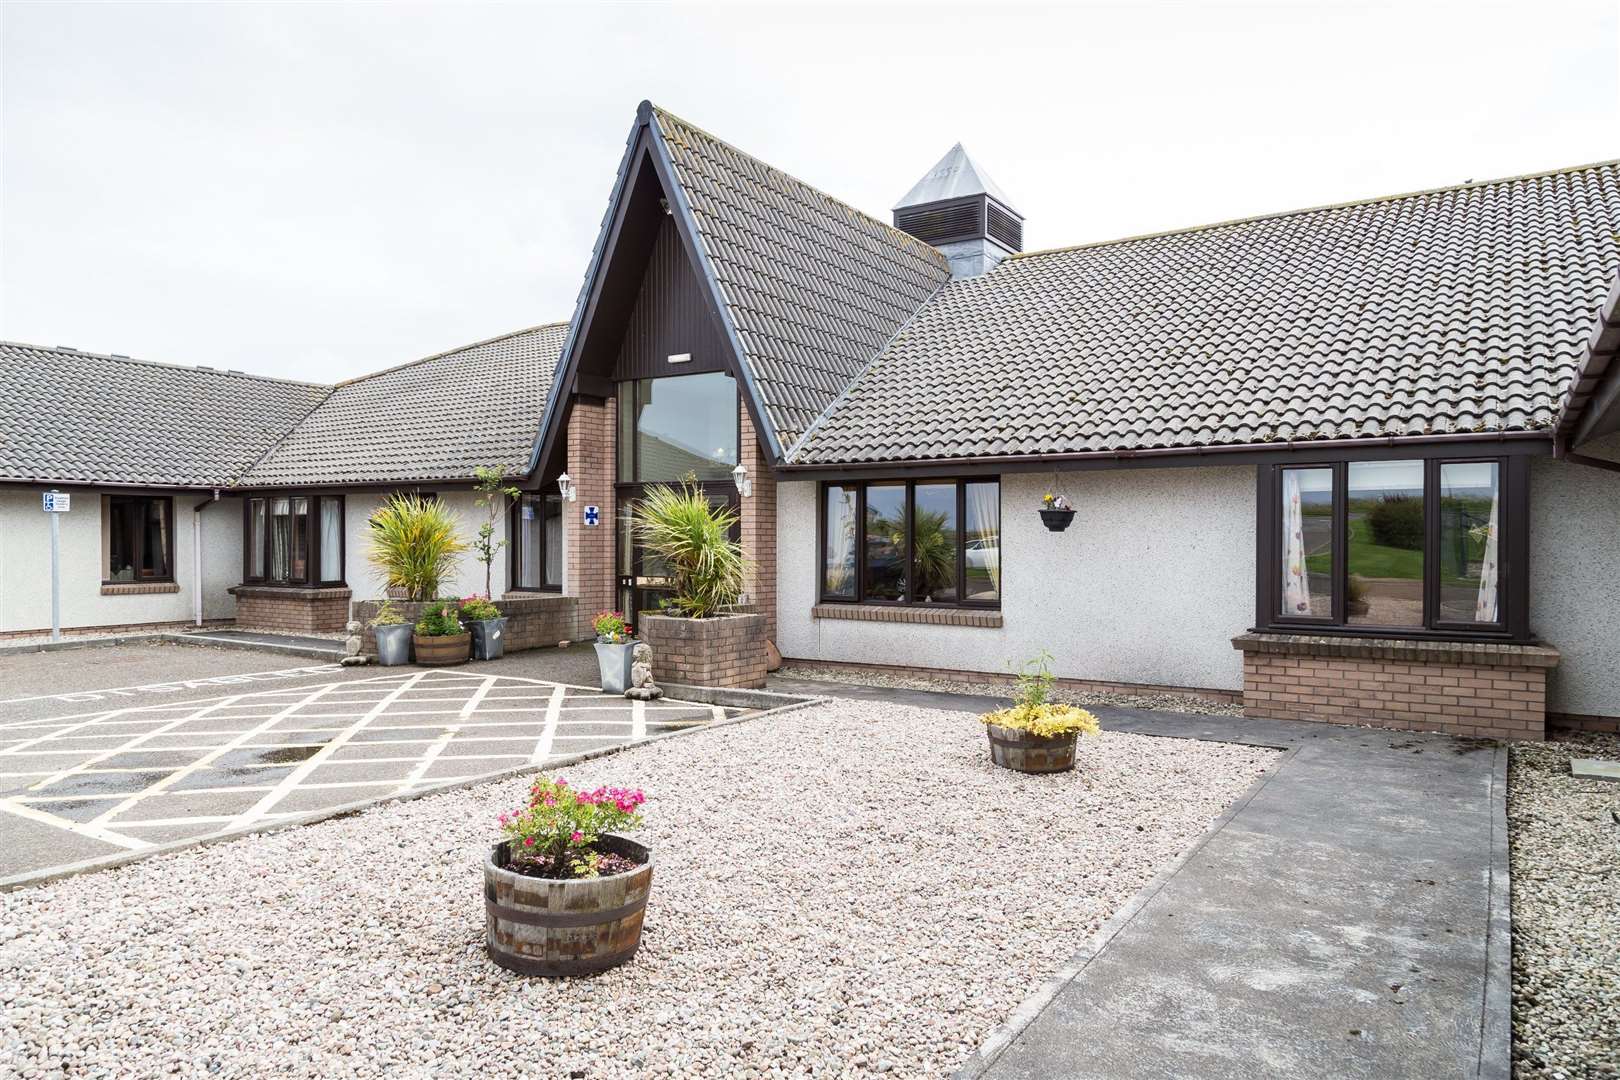 Pentland View care home wants to welcome the community in.